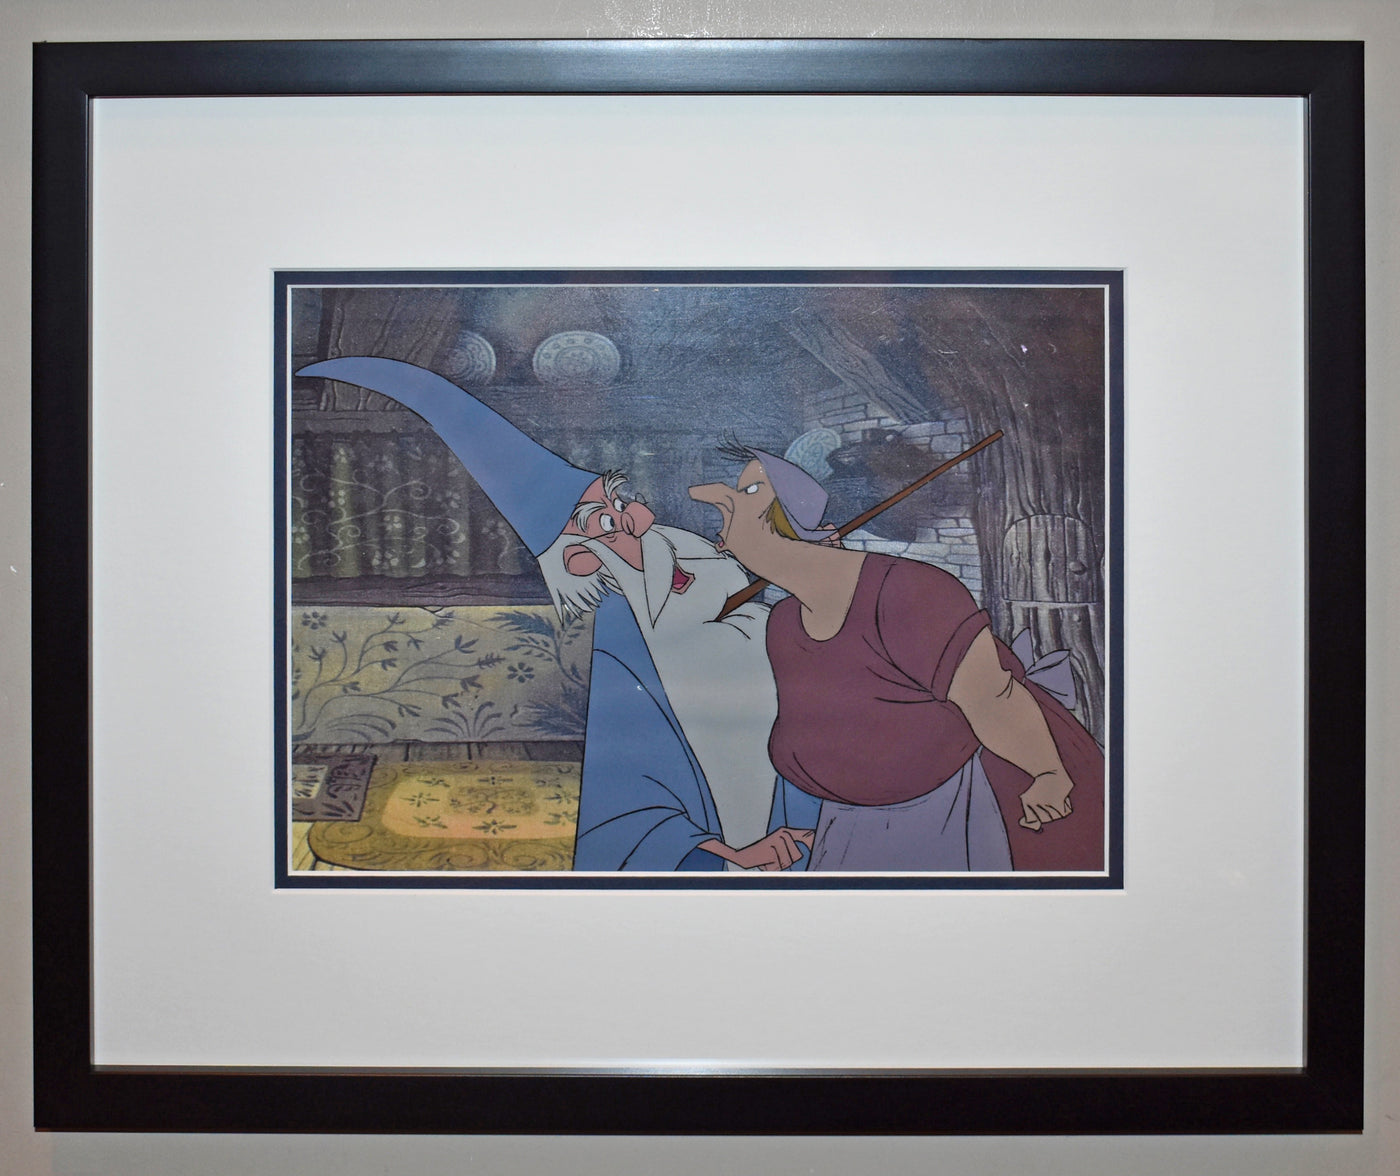 Original Walt Disney Production Cel from The Sword in the Stone featuring Merlin